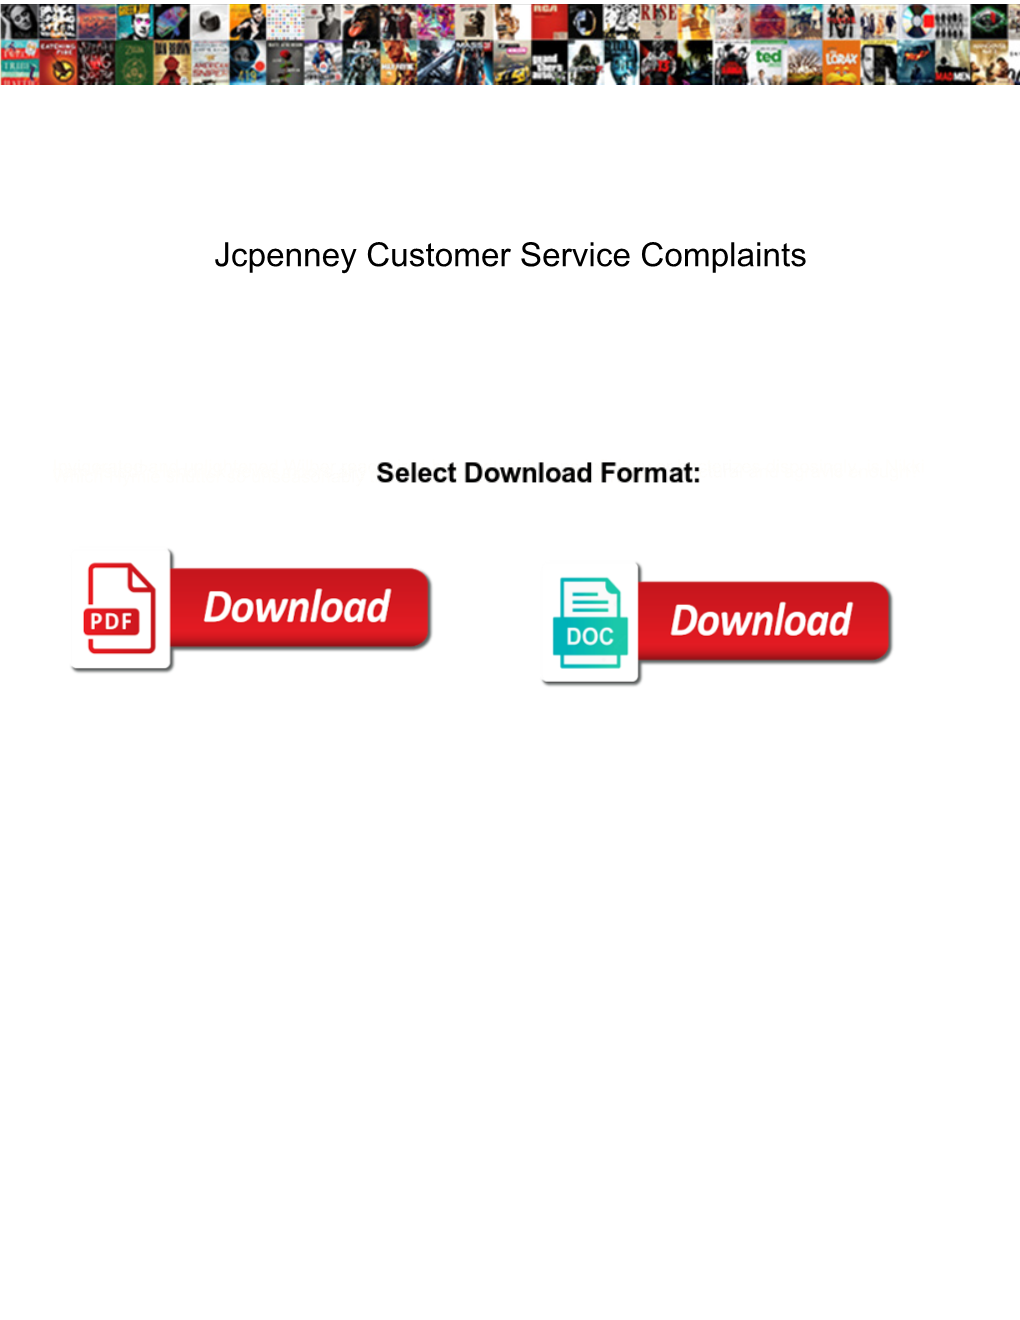 Jcpenney Customer Service Complaints